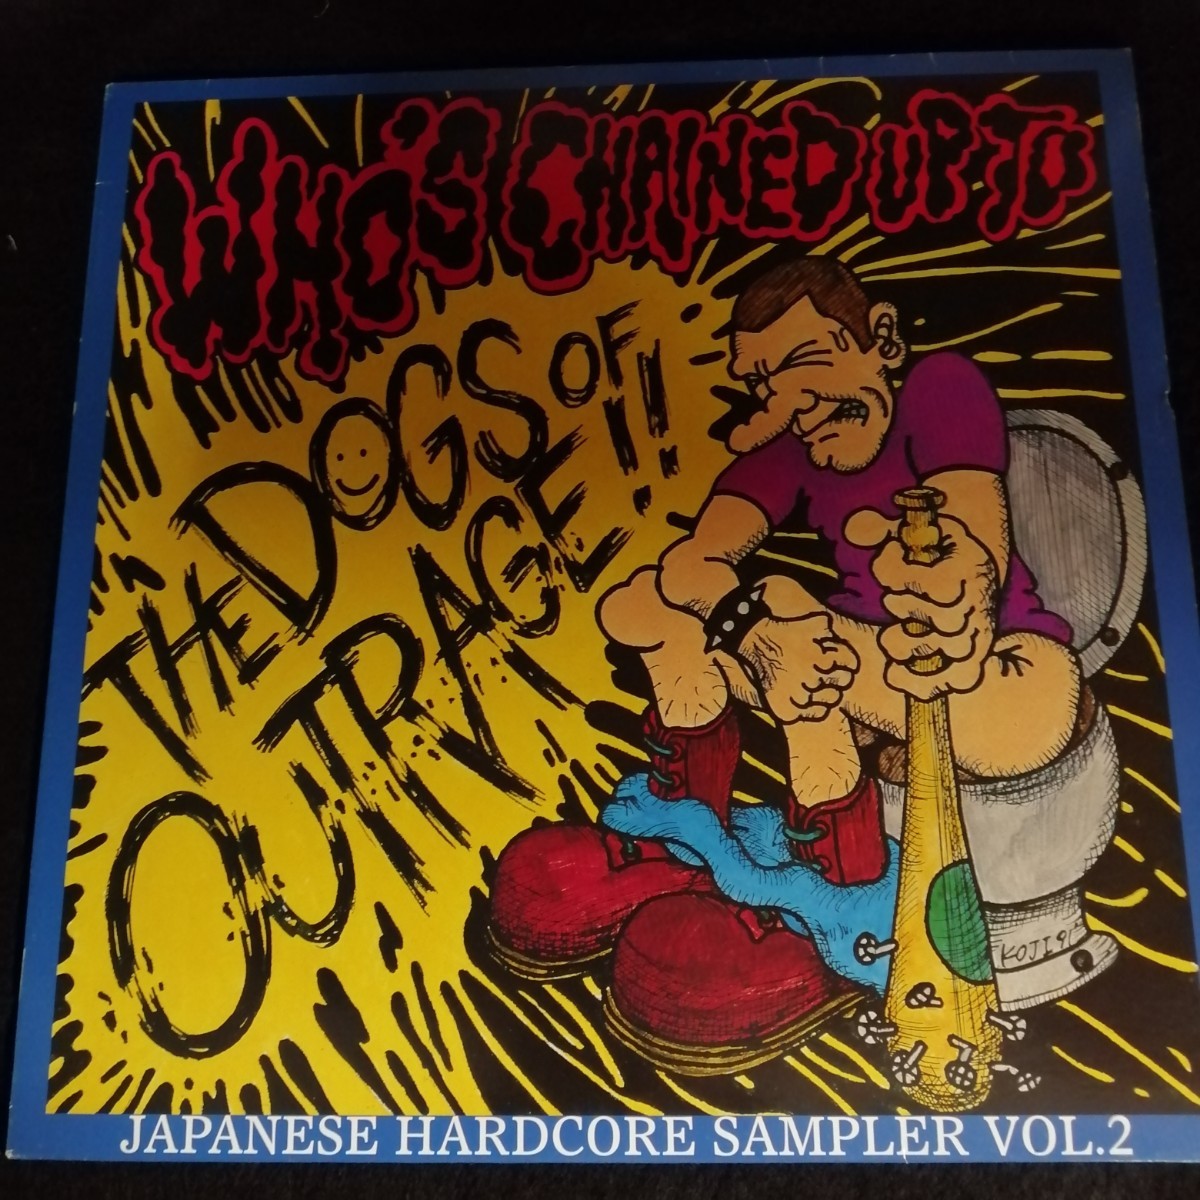 C12 中古LP 中古レコード　日本のパンクオムニバス　WHOS CHAINED UP TO THE DOGS OF OUTRAGE UK盤　DISC LP4_画像1